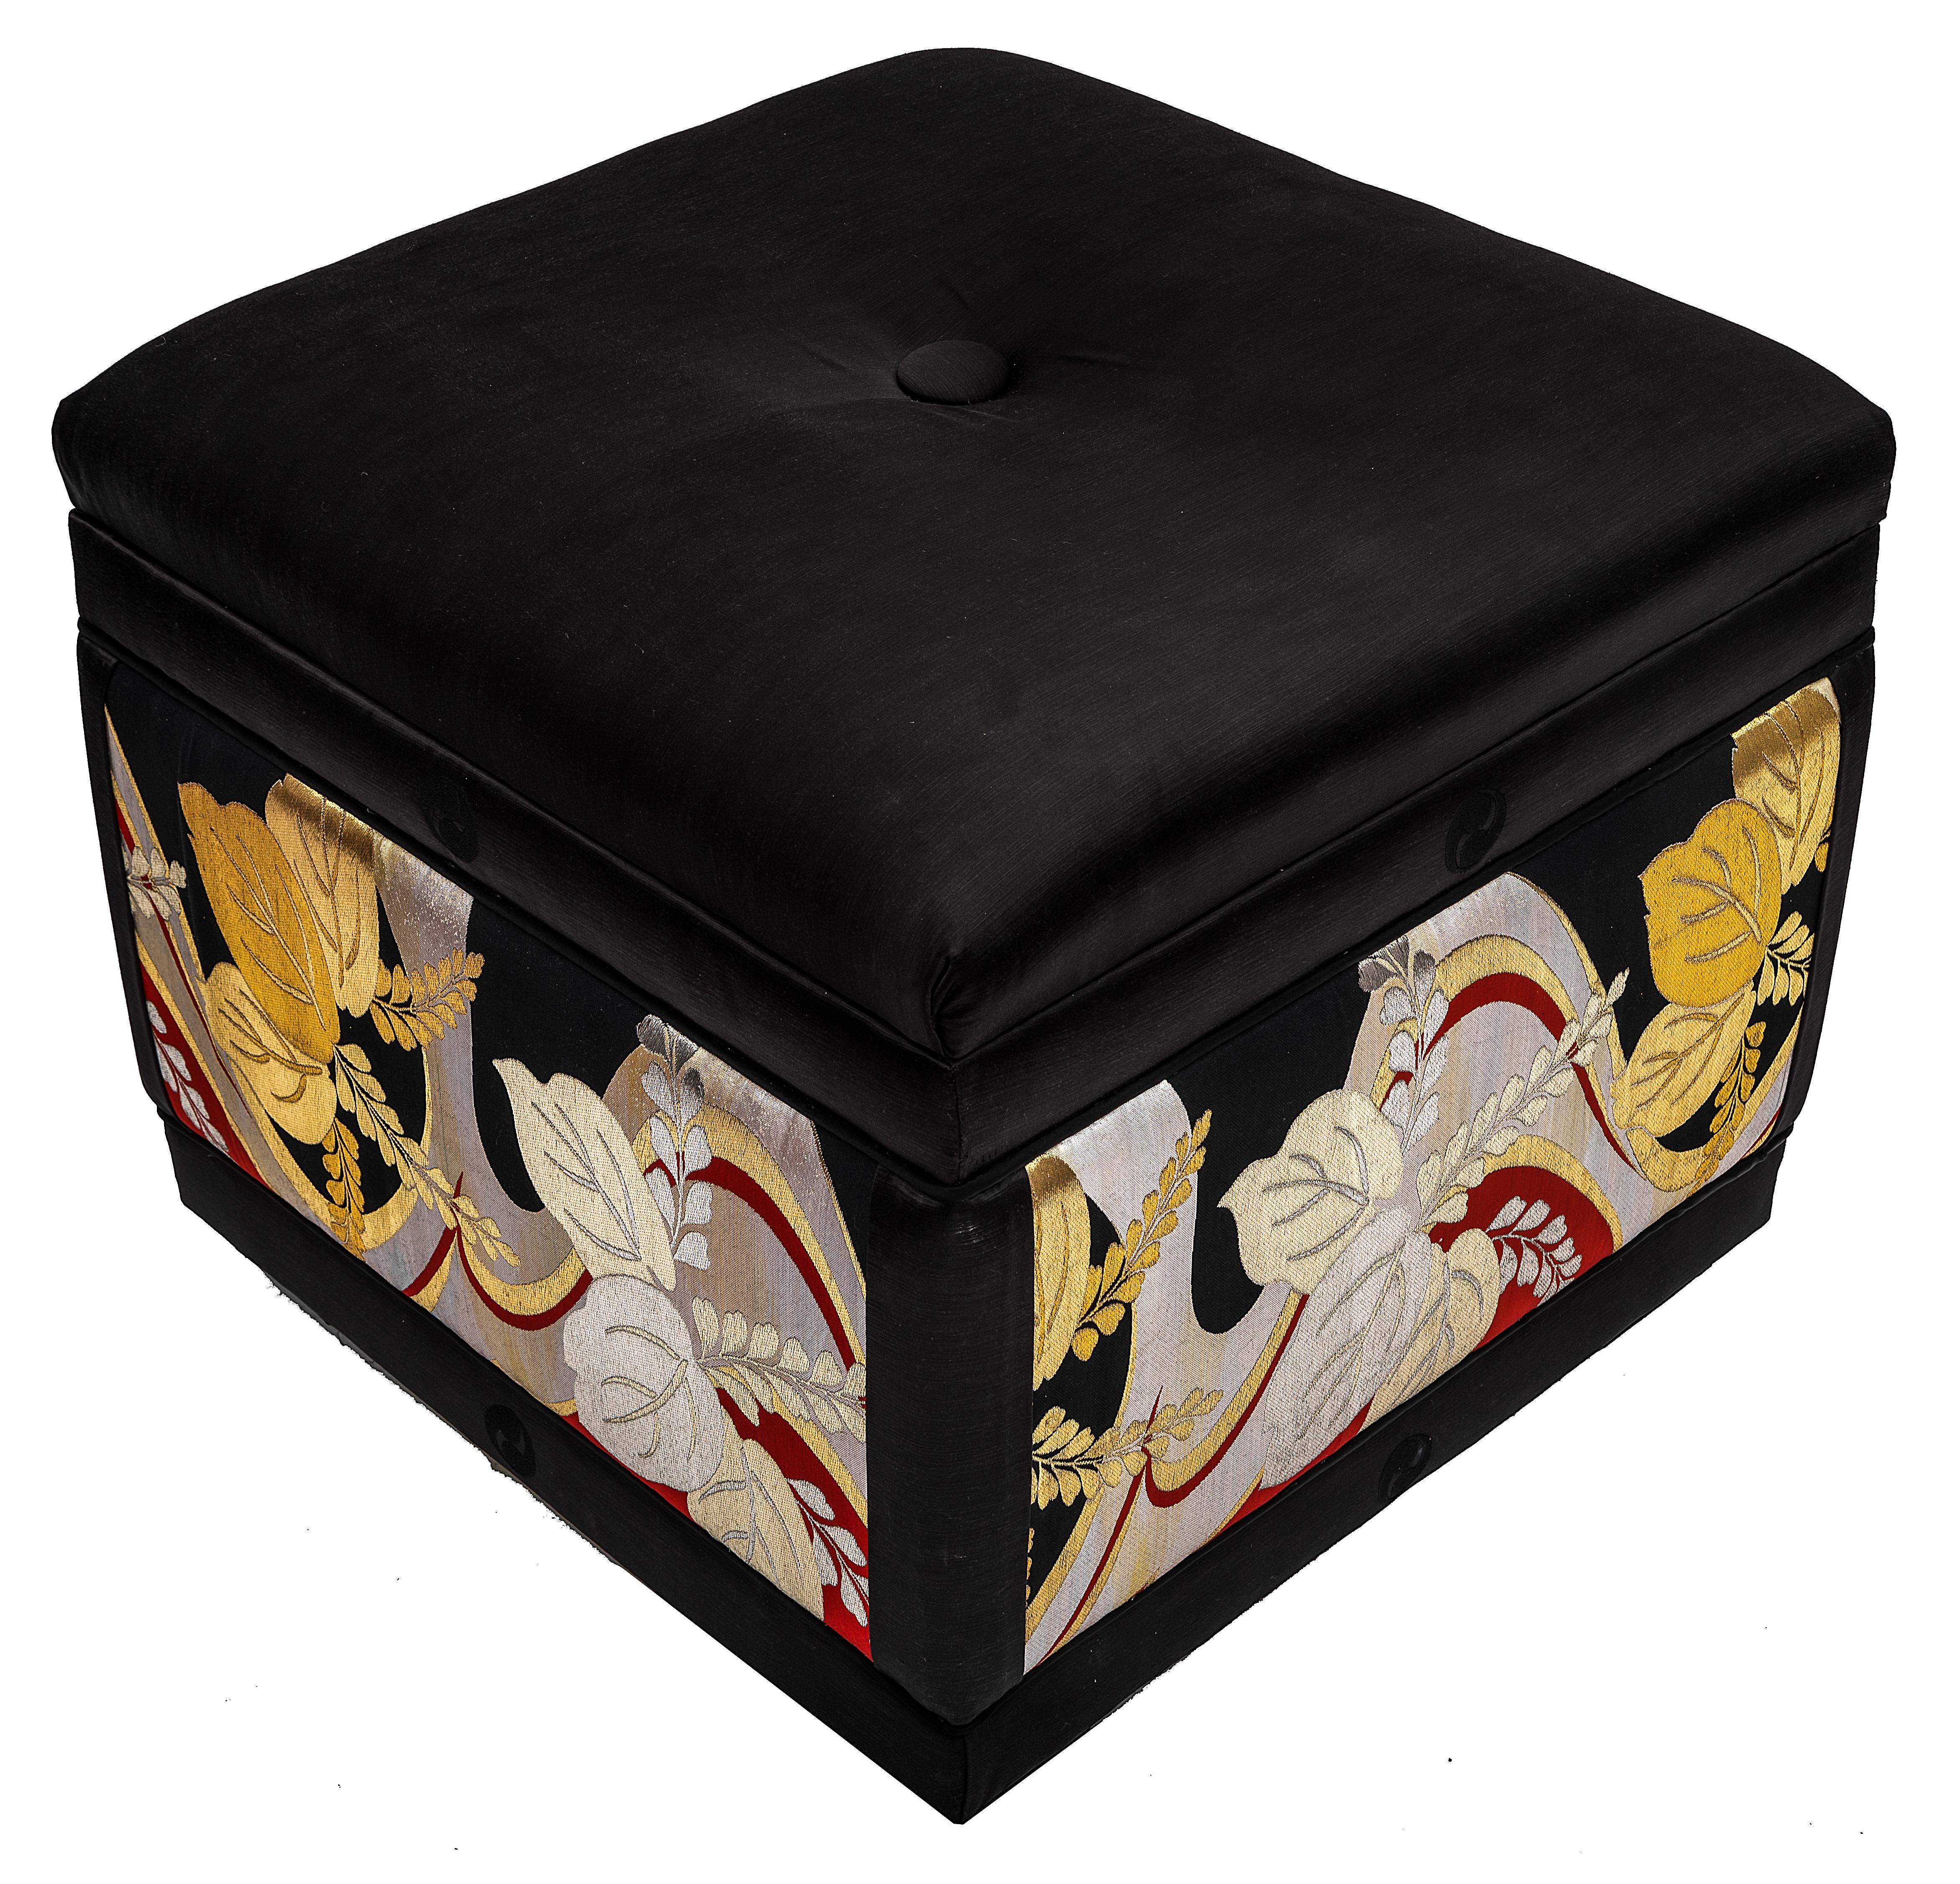 These one-of-a-kind pair of ottomans are statement pieces that add sophisticated elegance and dramatic flair to any room they inhabit. The extremely comfortable attached top cushions are covered in a black slub weave silk. The sides of each ottoman